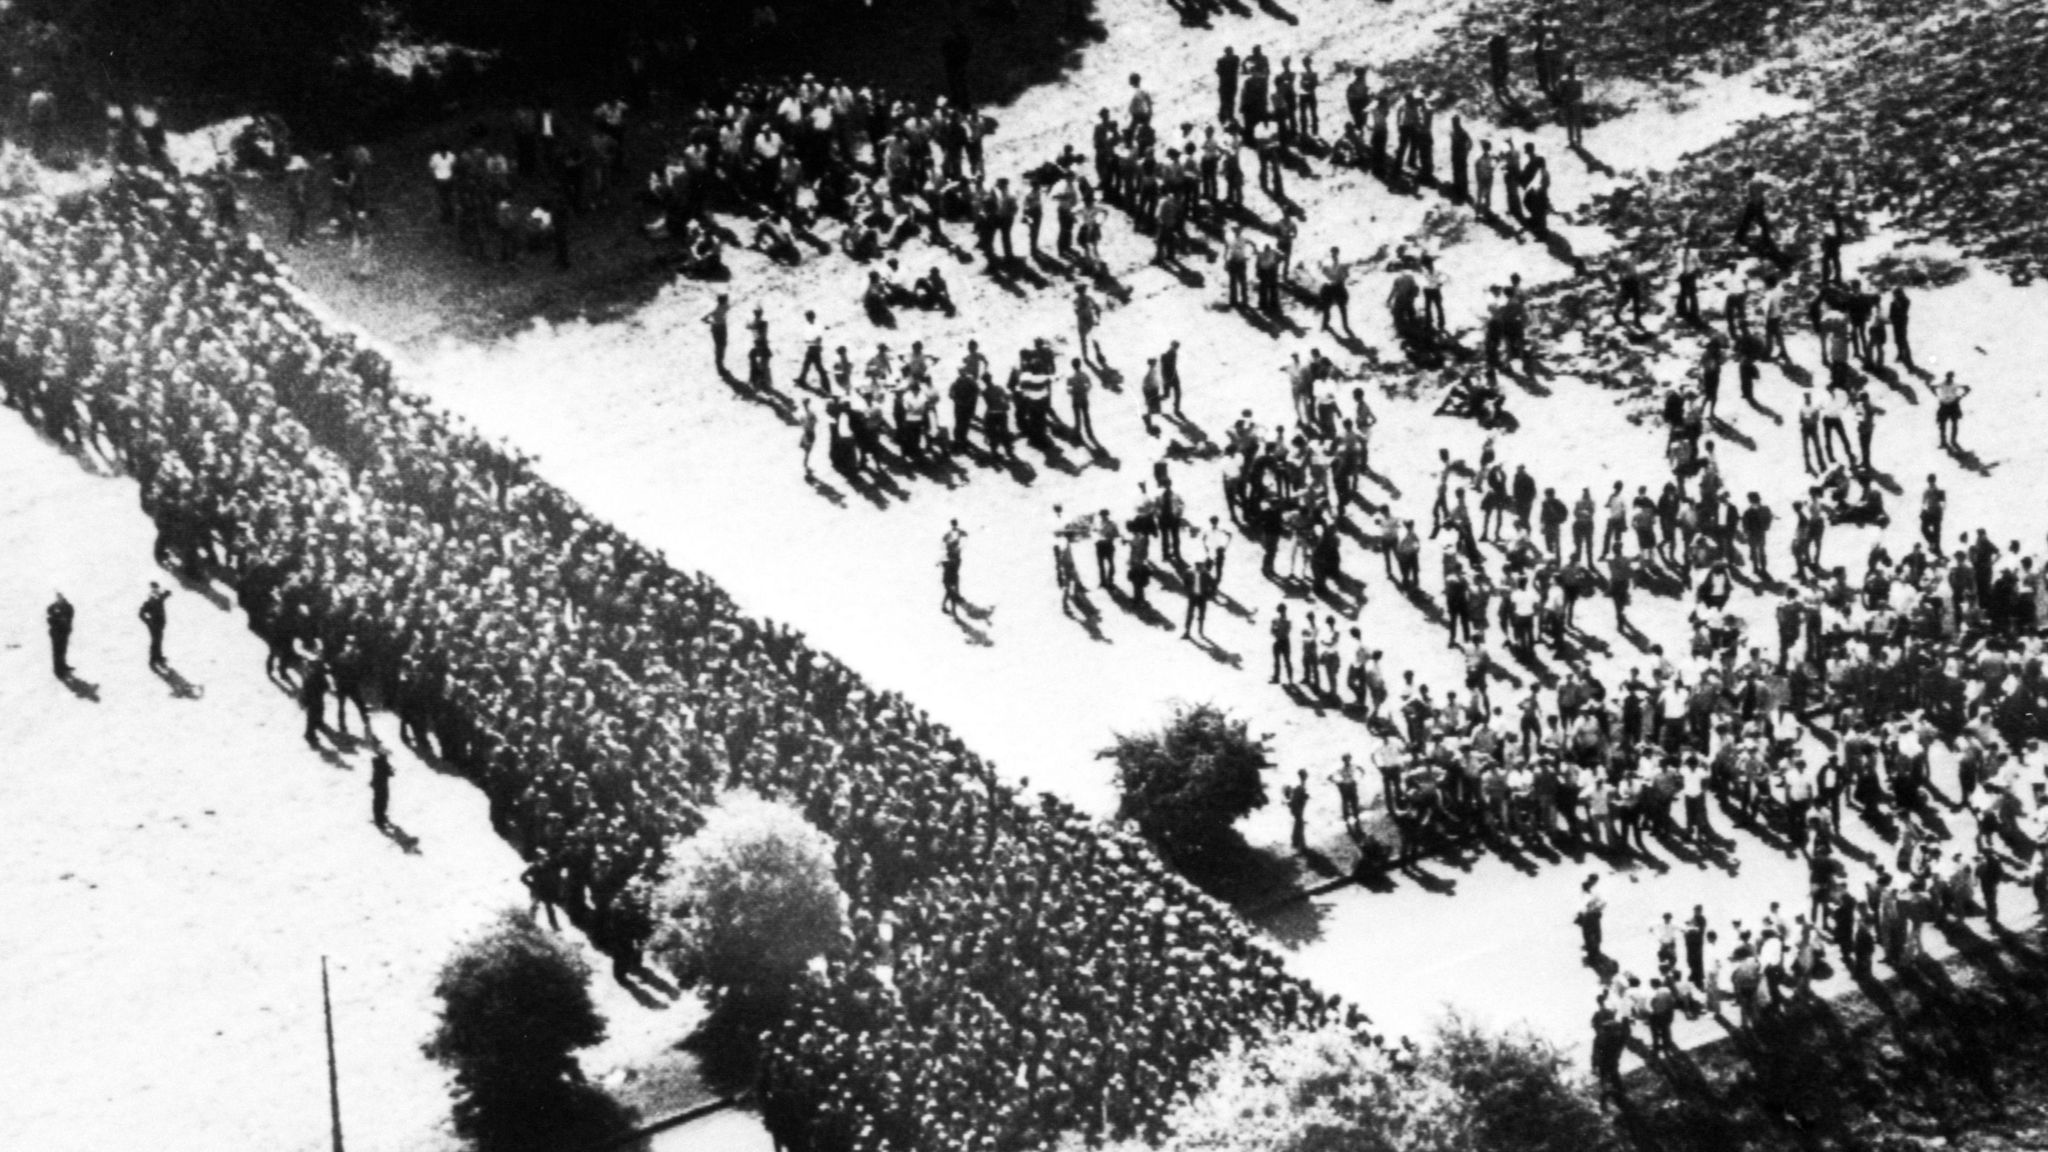 About 6,000 police officers were deployed at Orgreave